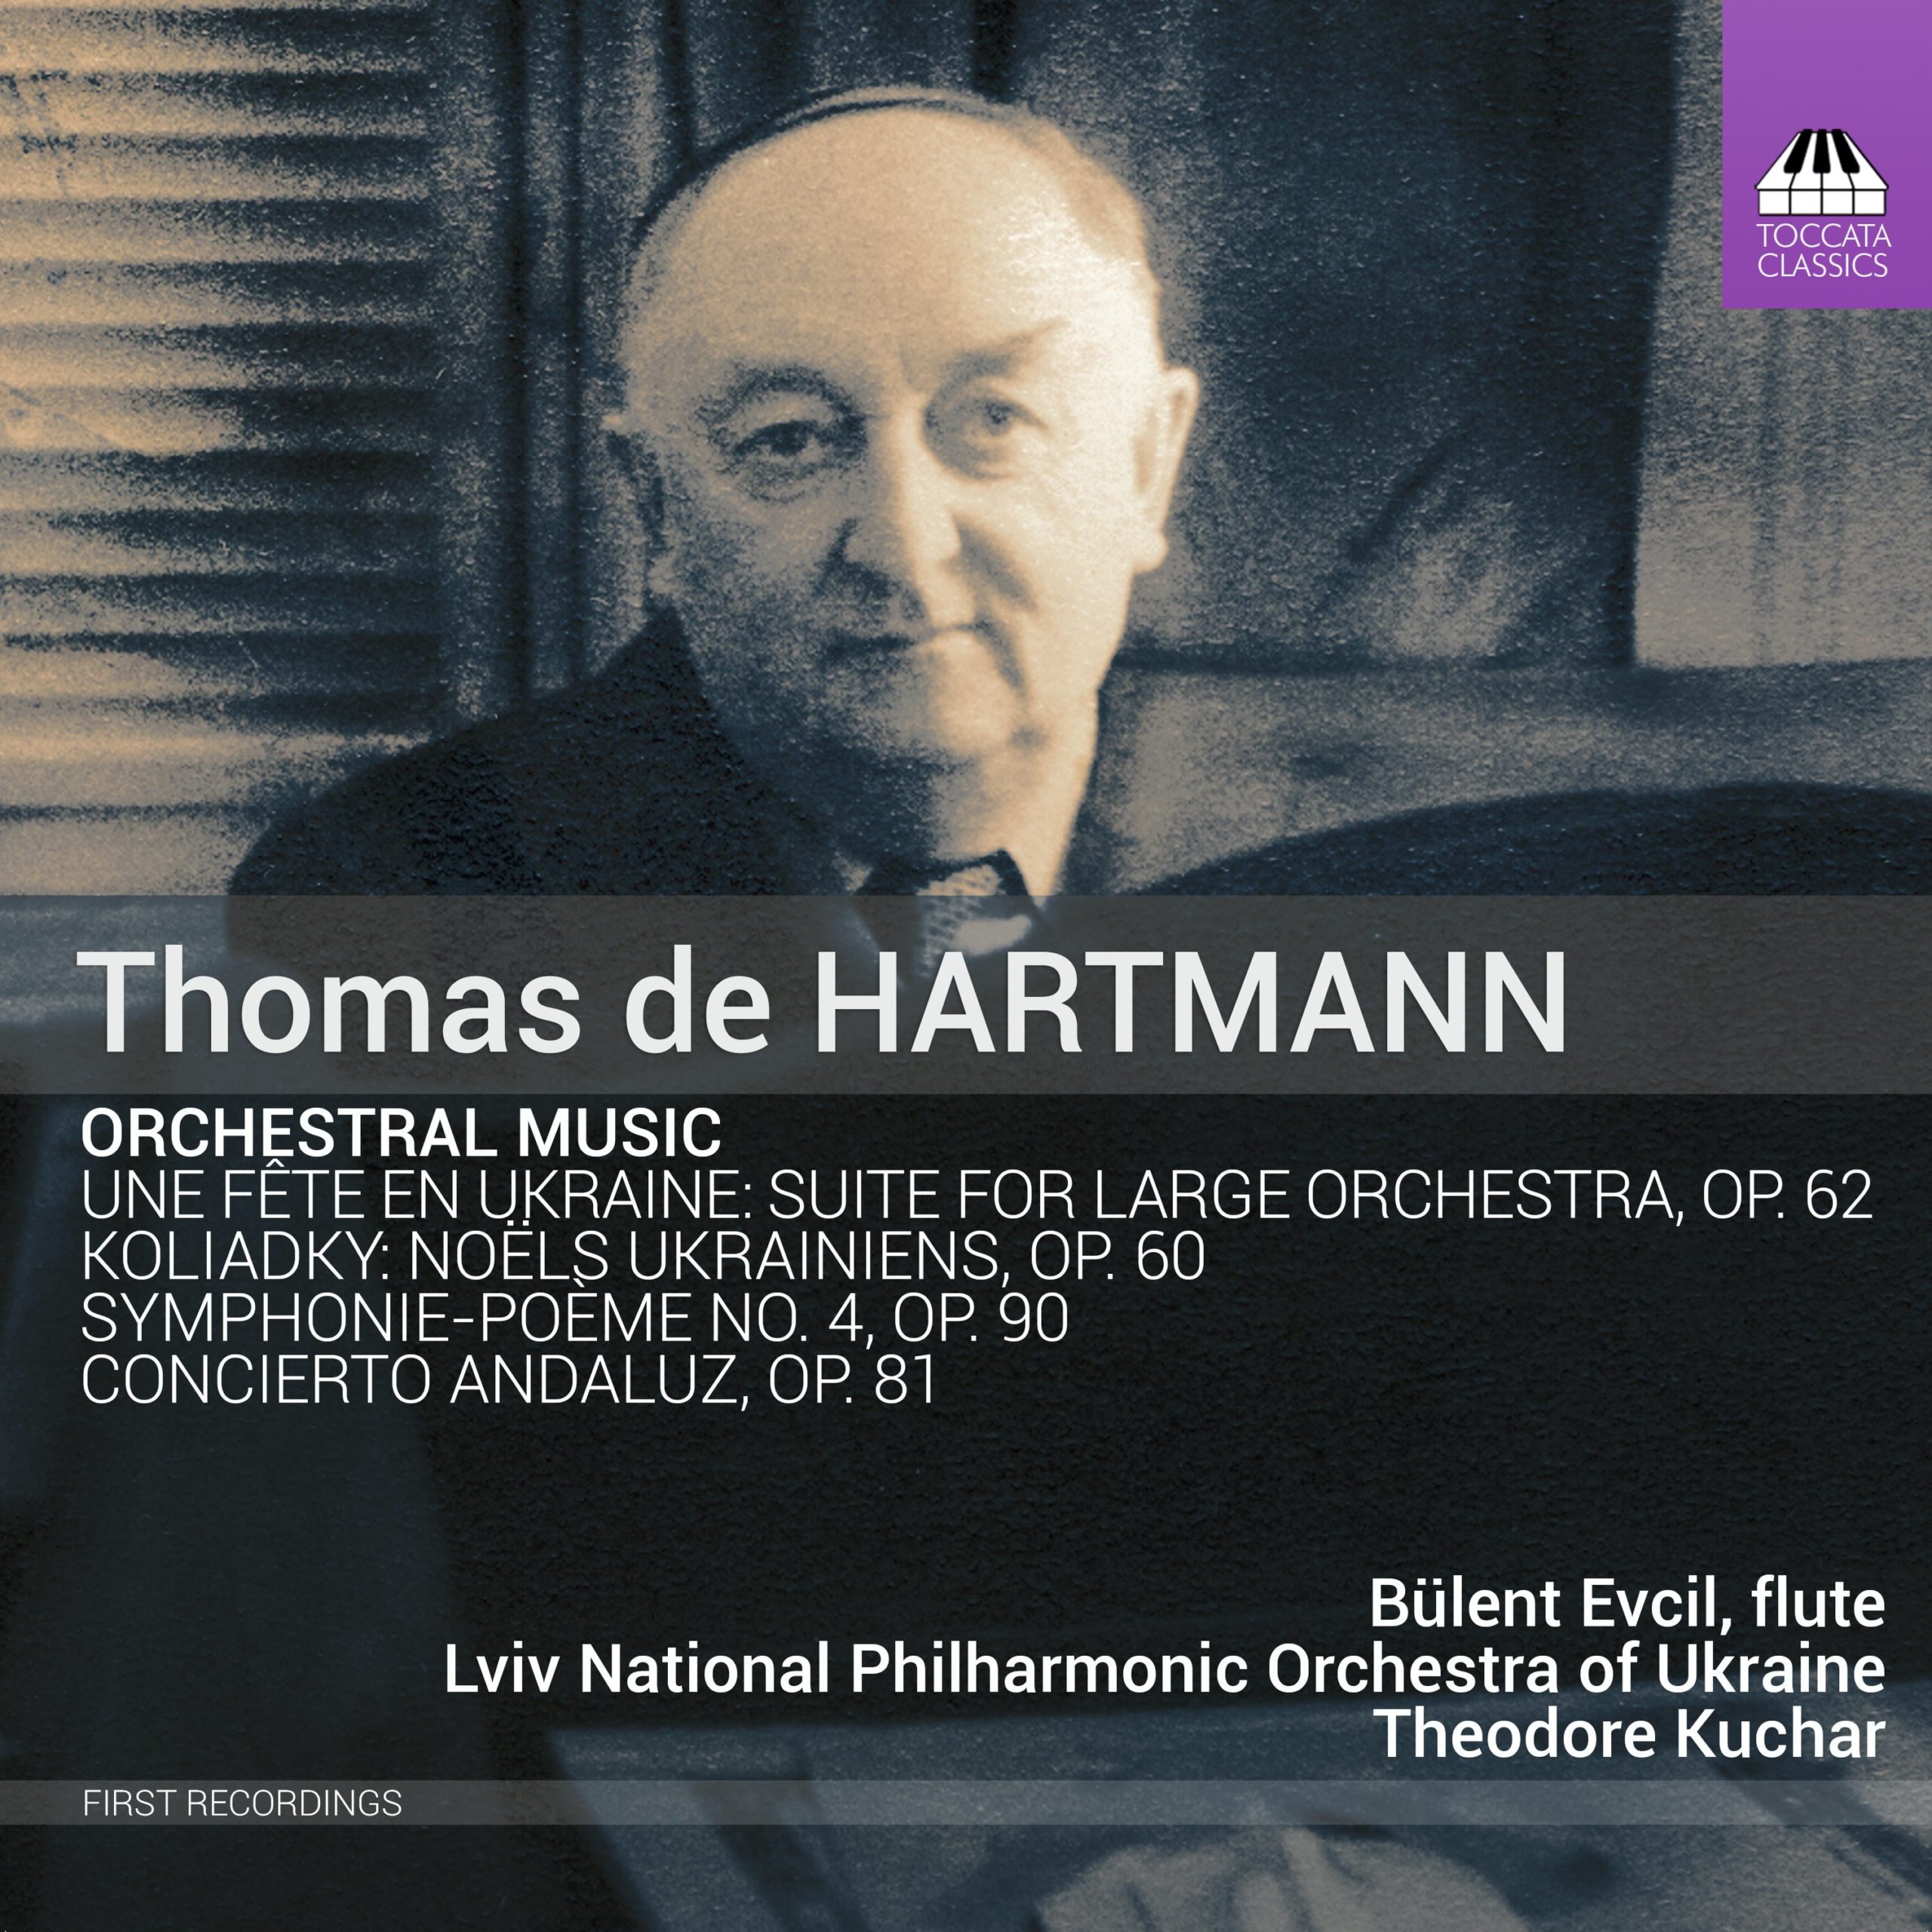 David Hurwitz at ClassicsToday.com gives the KOLA award (top ten list for 2022) to Thomas de Hartmann Orchestral Music released by Toccata in Feb.